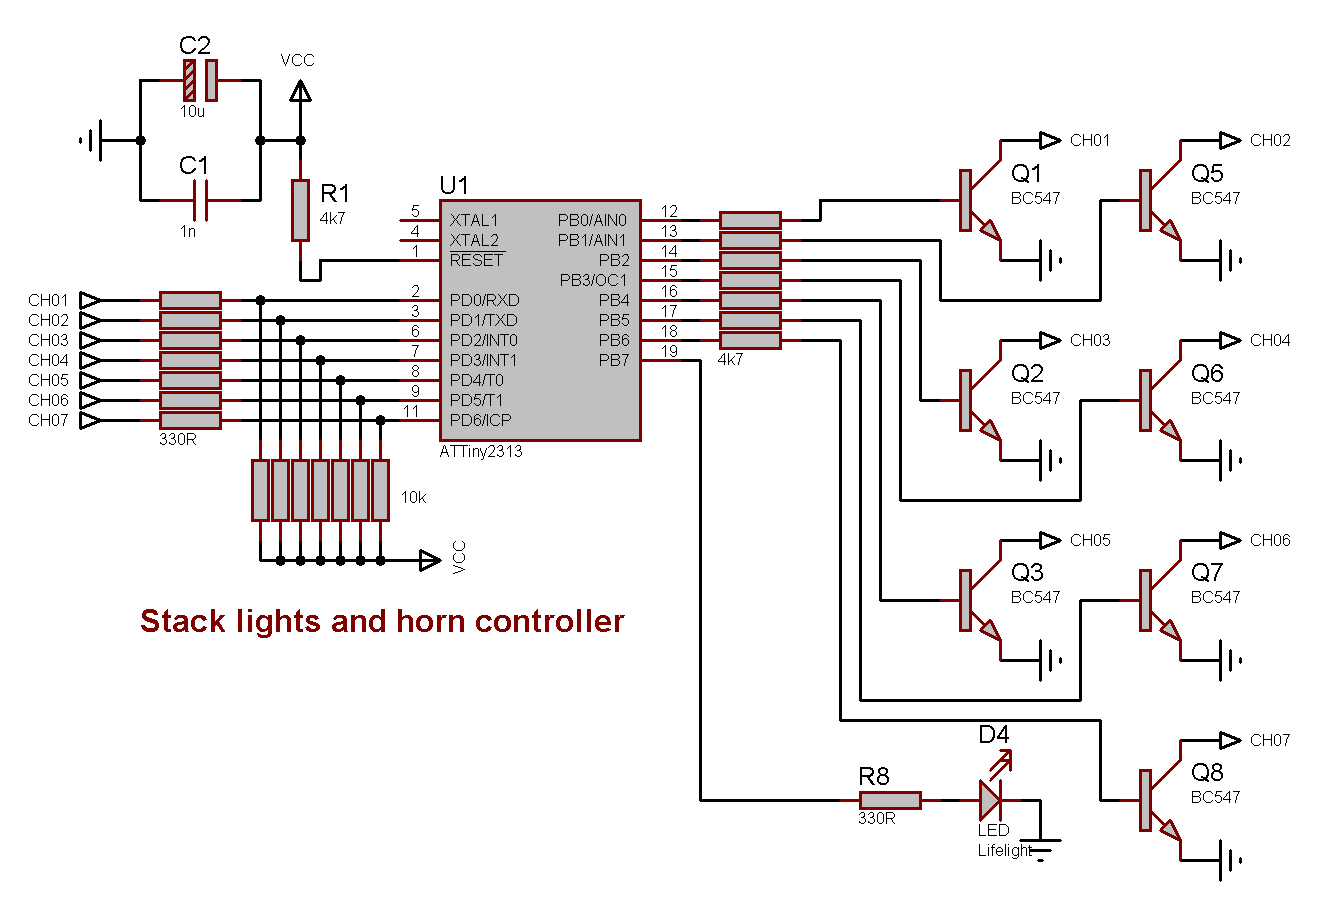 Schematics for the stack lights controller